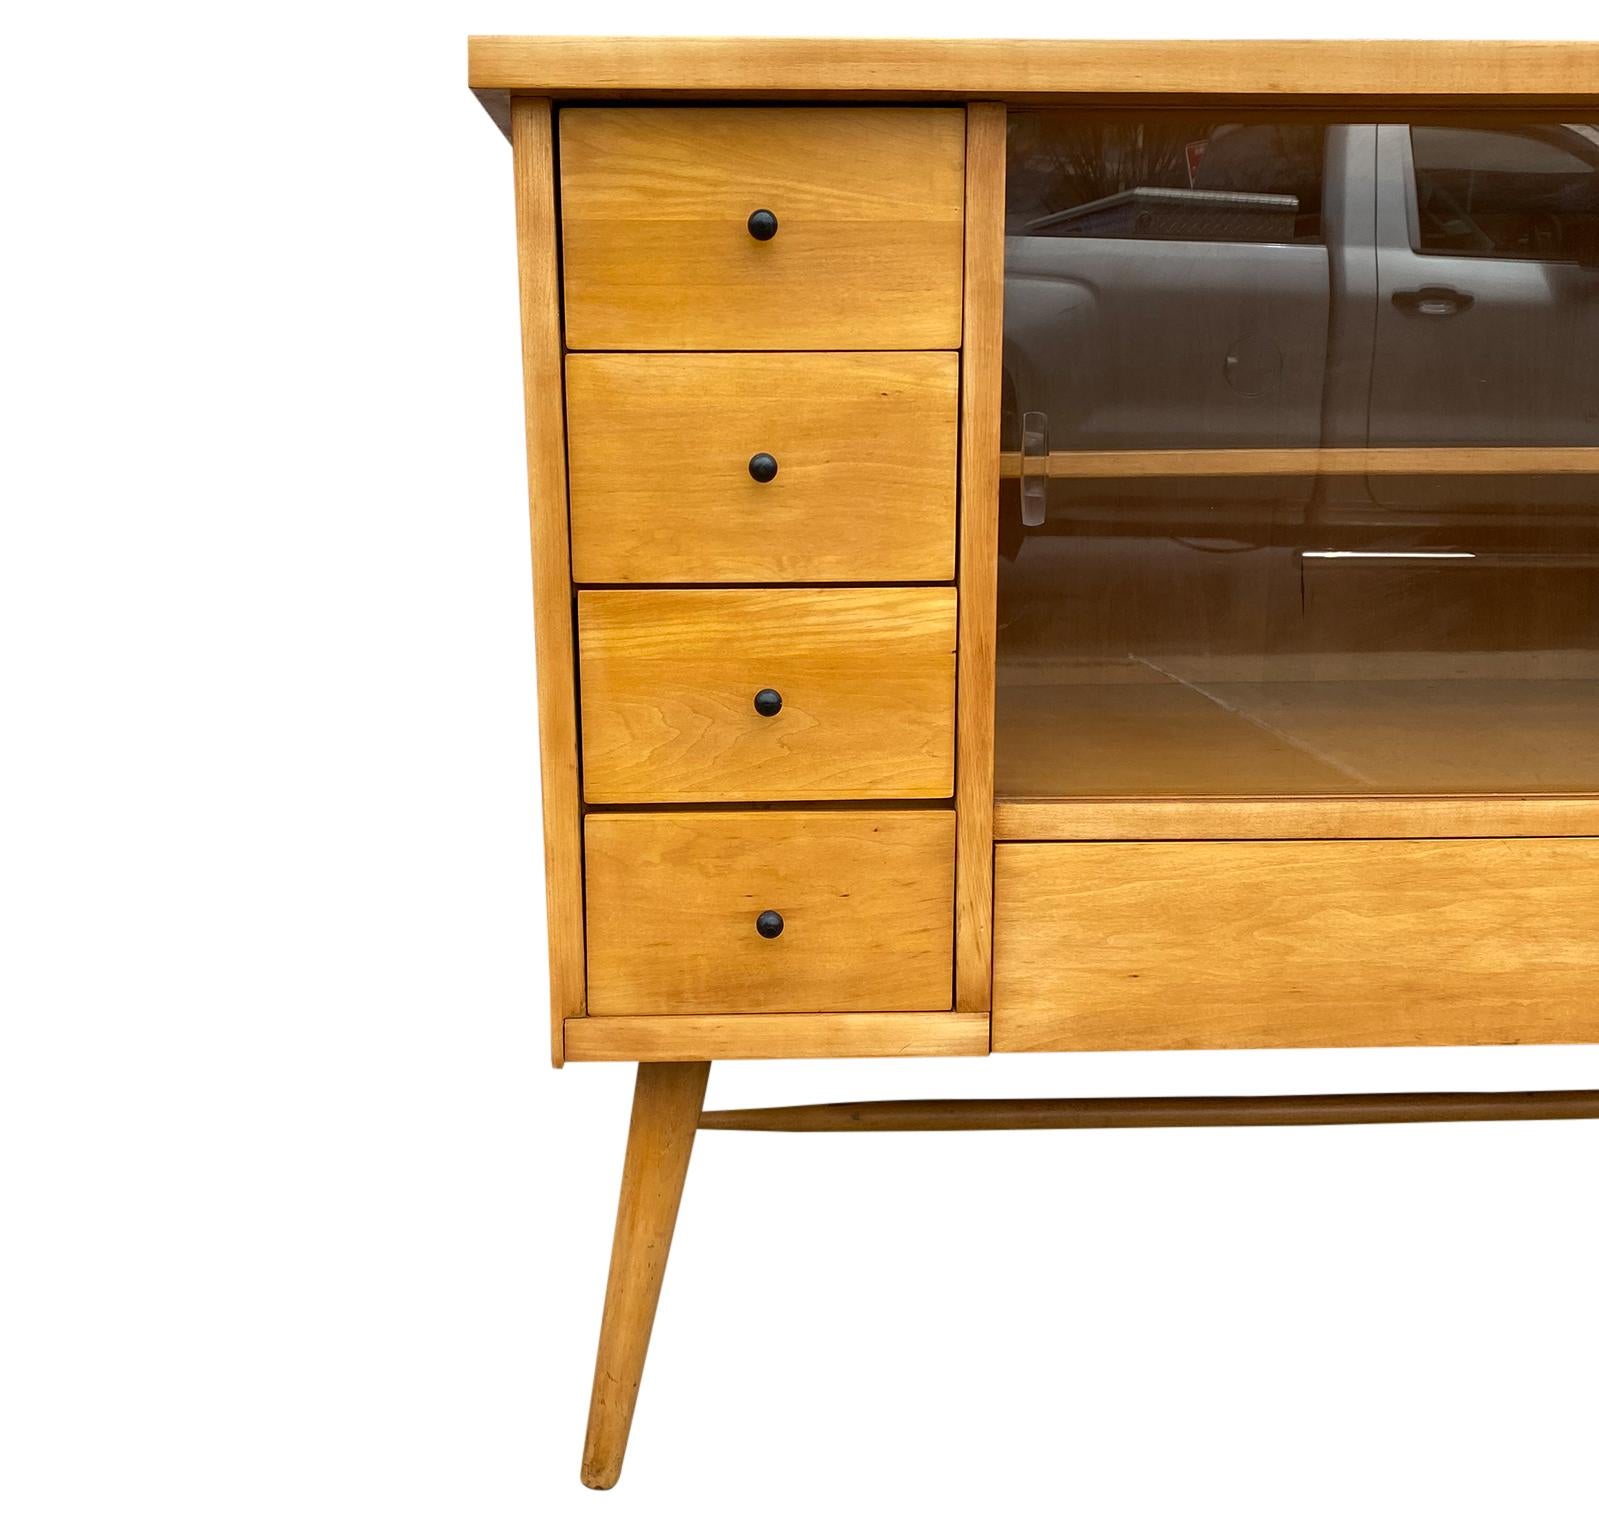 Very Rare Mid-Century Modern Maple Predictor Credenza by Paul McCobb for O’hearn In Good Condition For Sale In BROOKLYN, NY